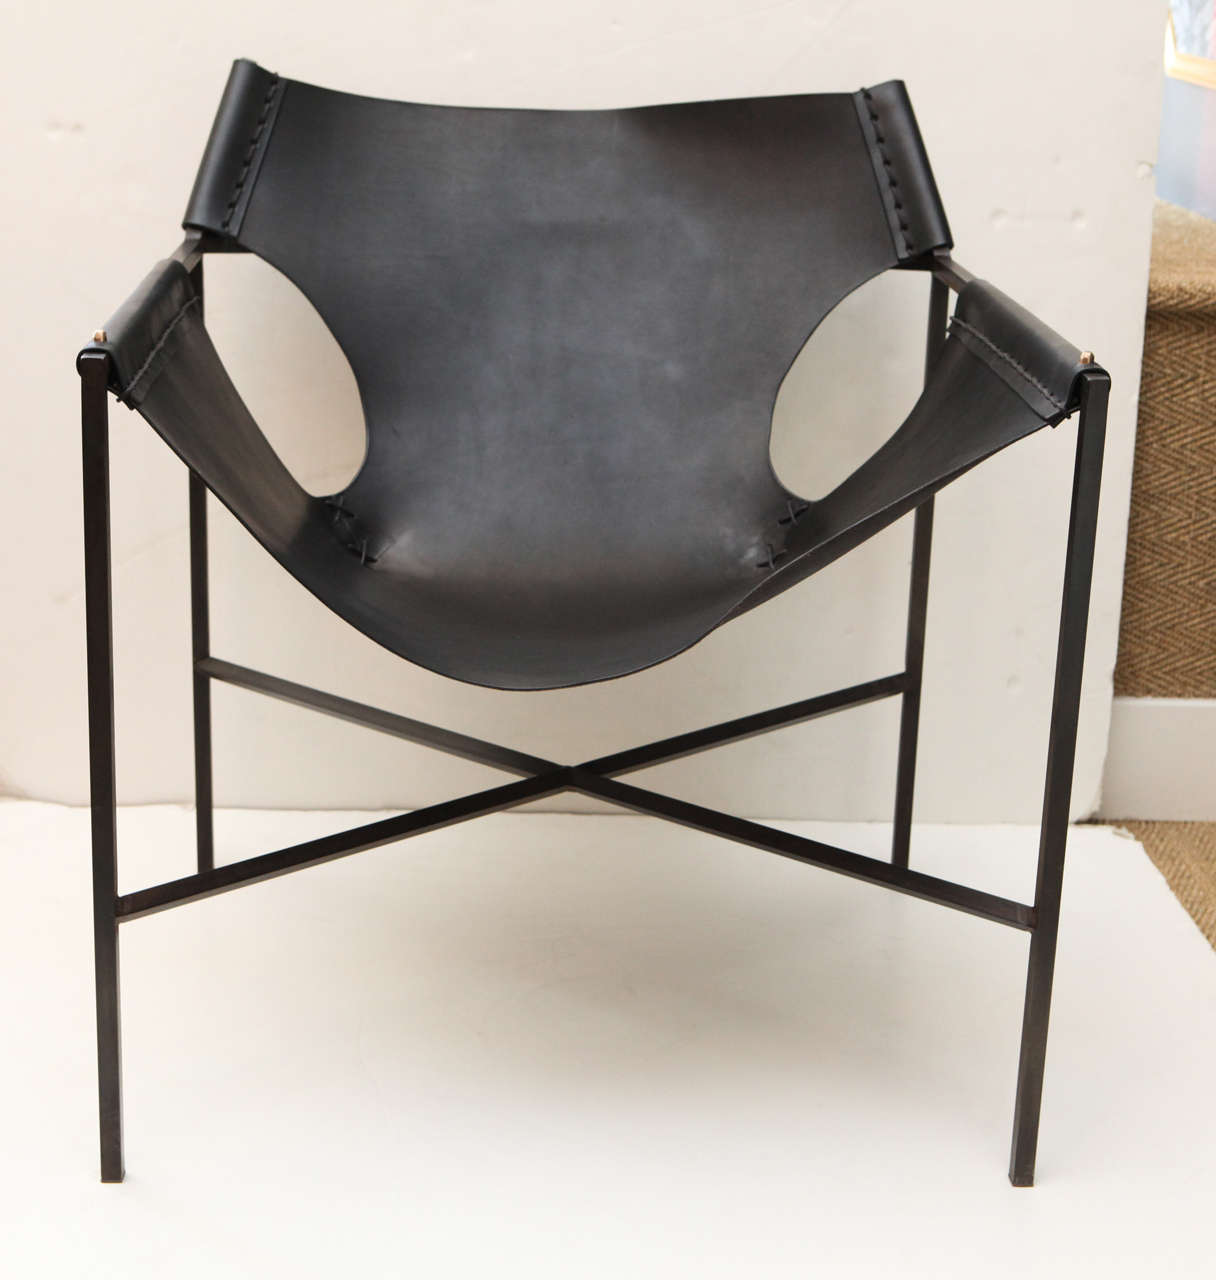 Steel and leather, x-based sling chair featuring wet-formed darted corners and hammered bronze rivets. Hand-cut leather is vegetable tanned with a waxed finish.